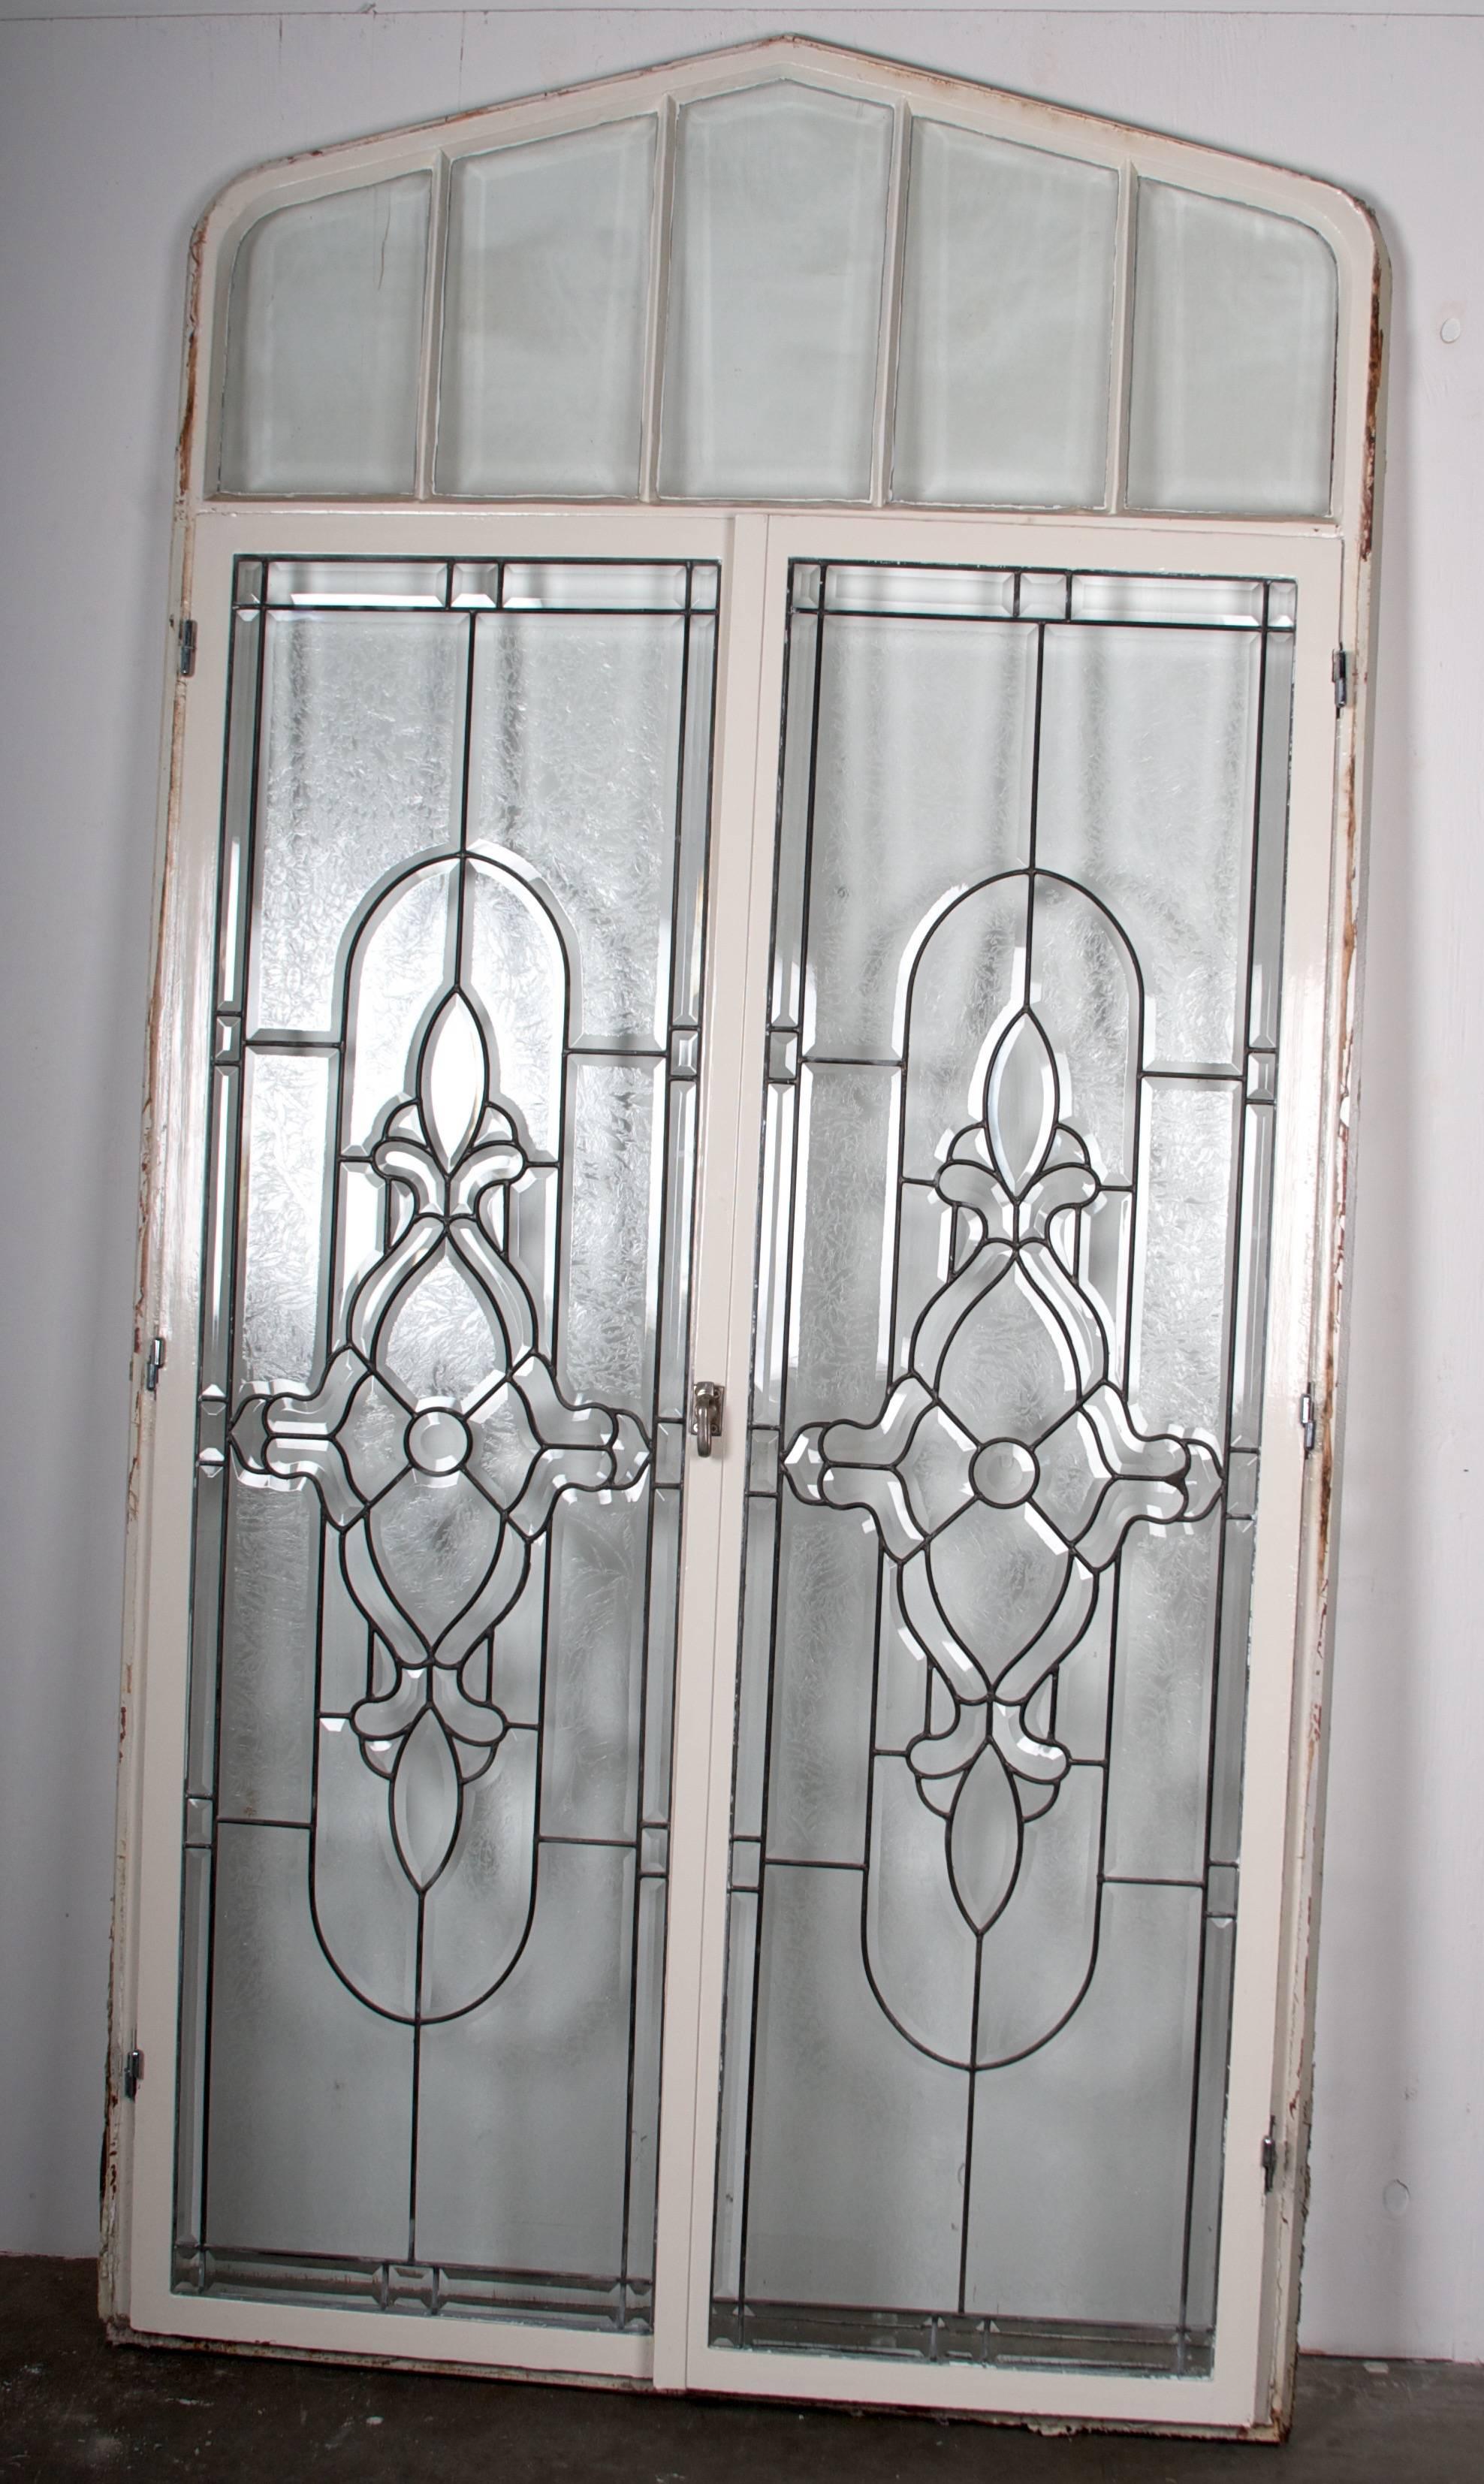 This is a series of beveled and lead trimmed windows, with wonderful bevels, partially
